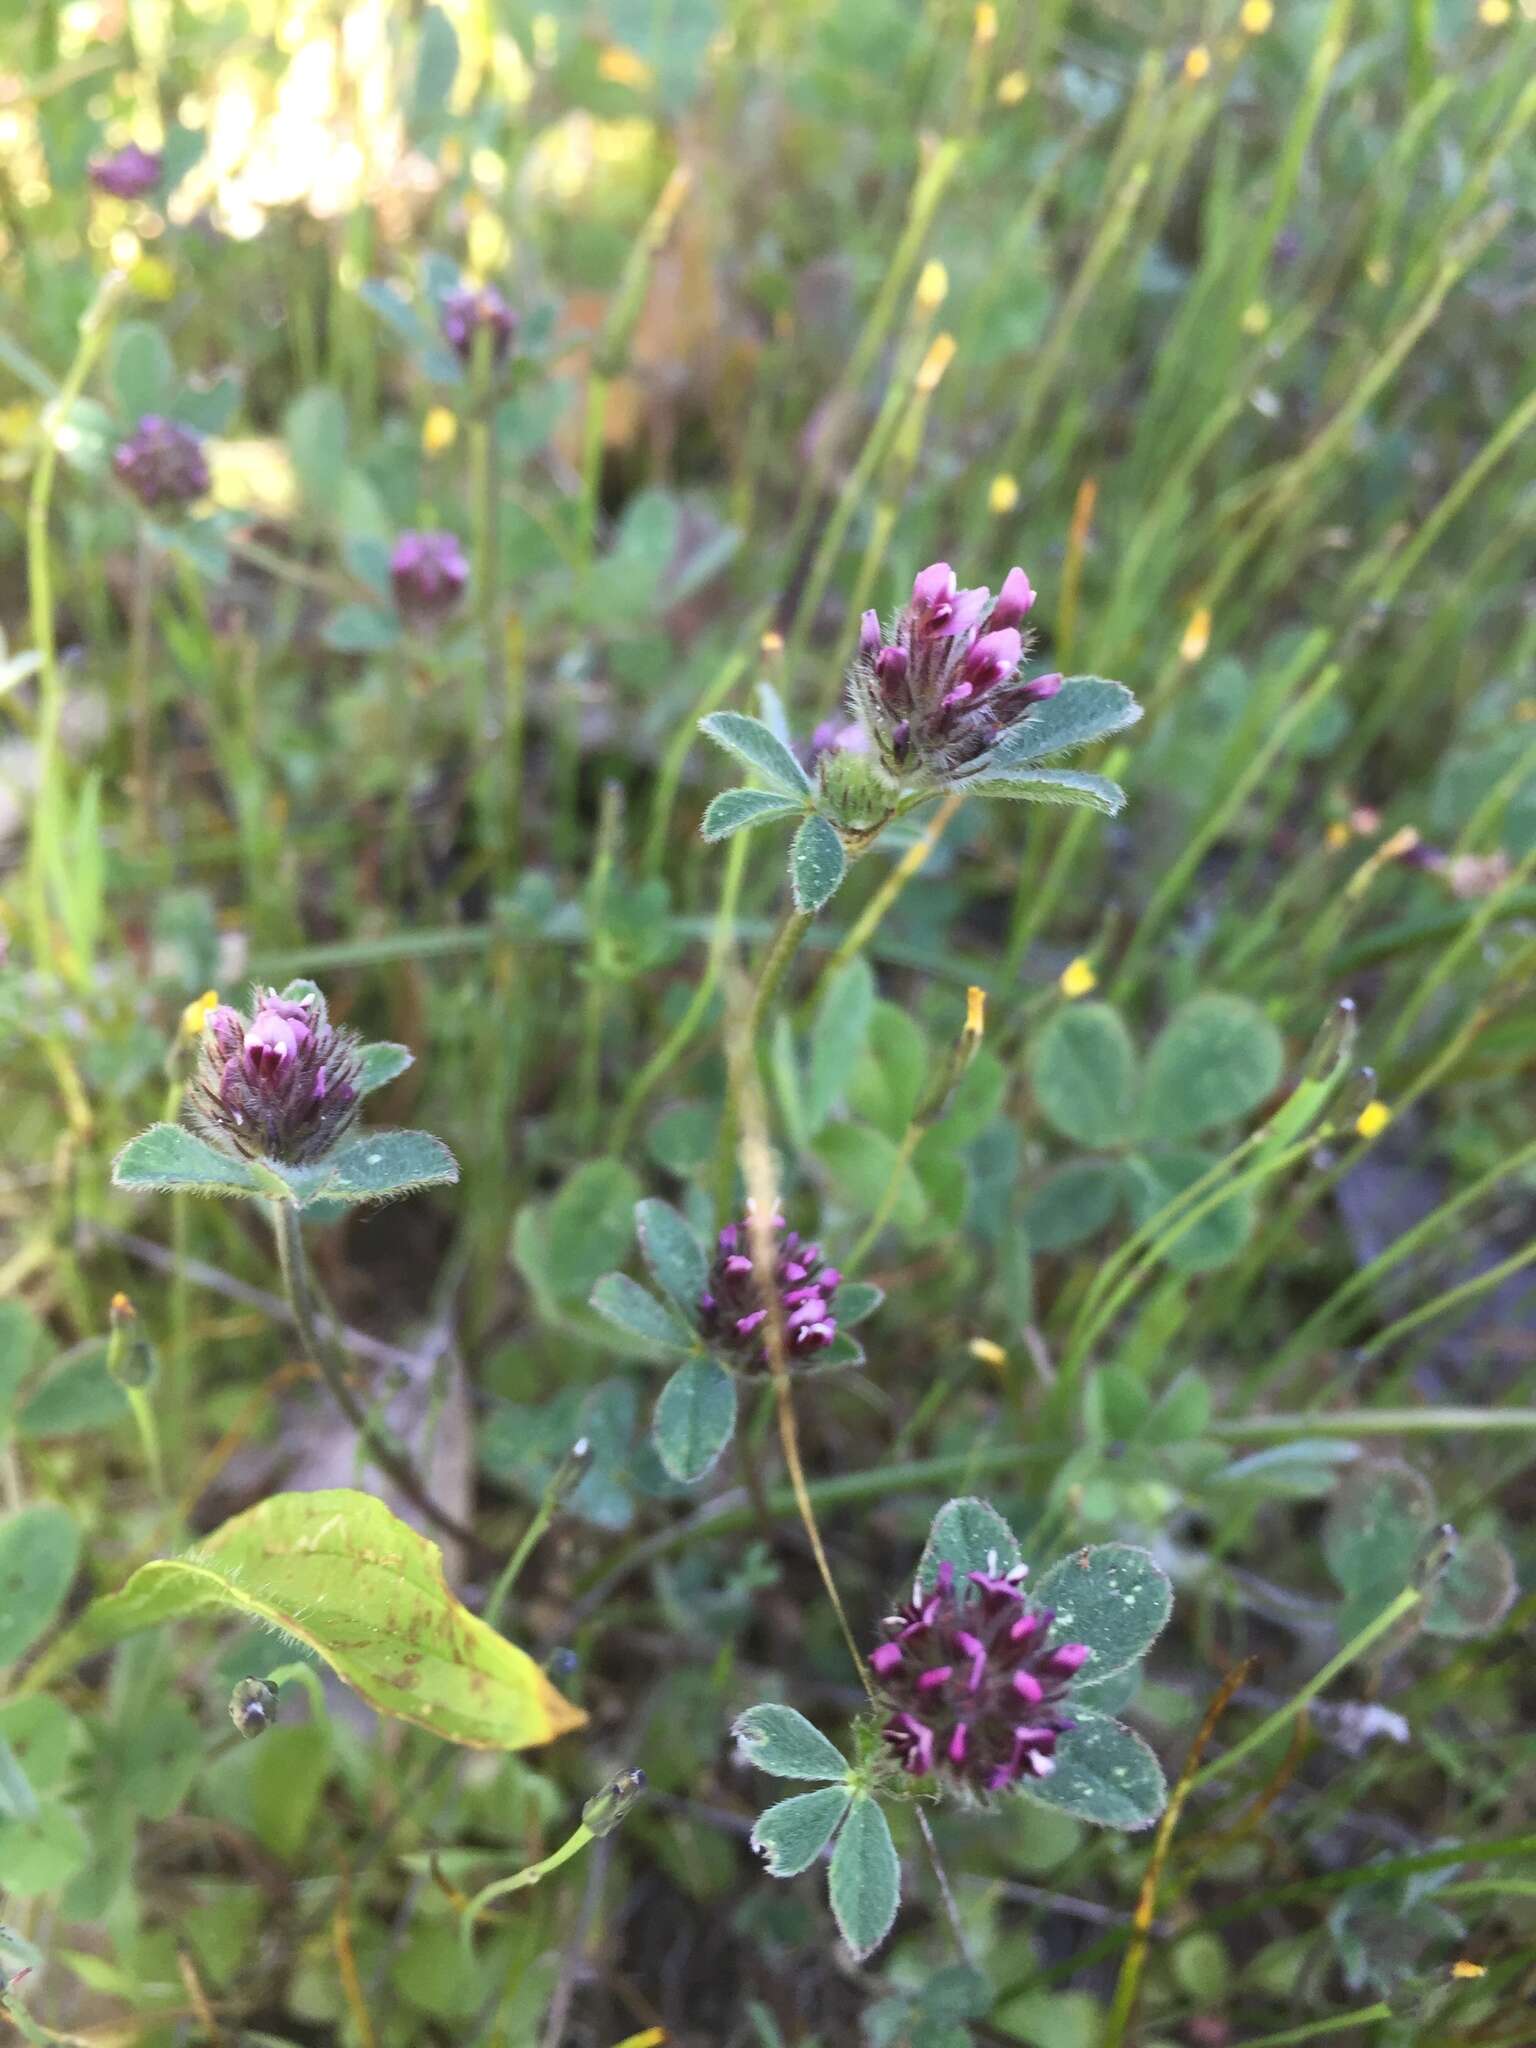 Image of Chilean clover